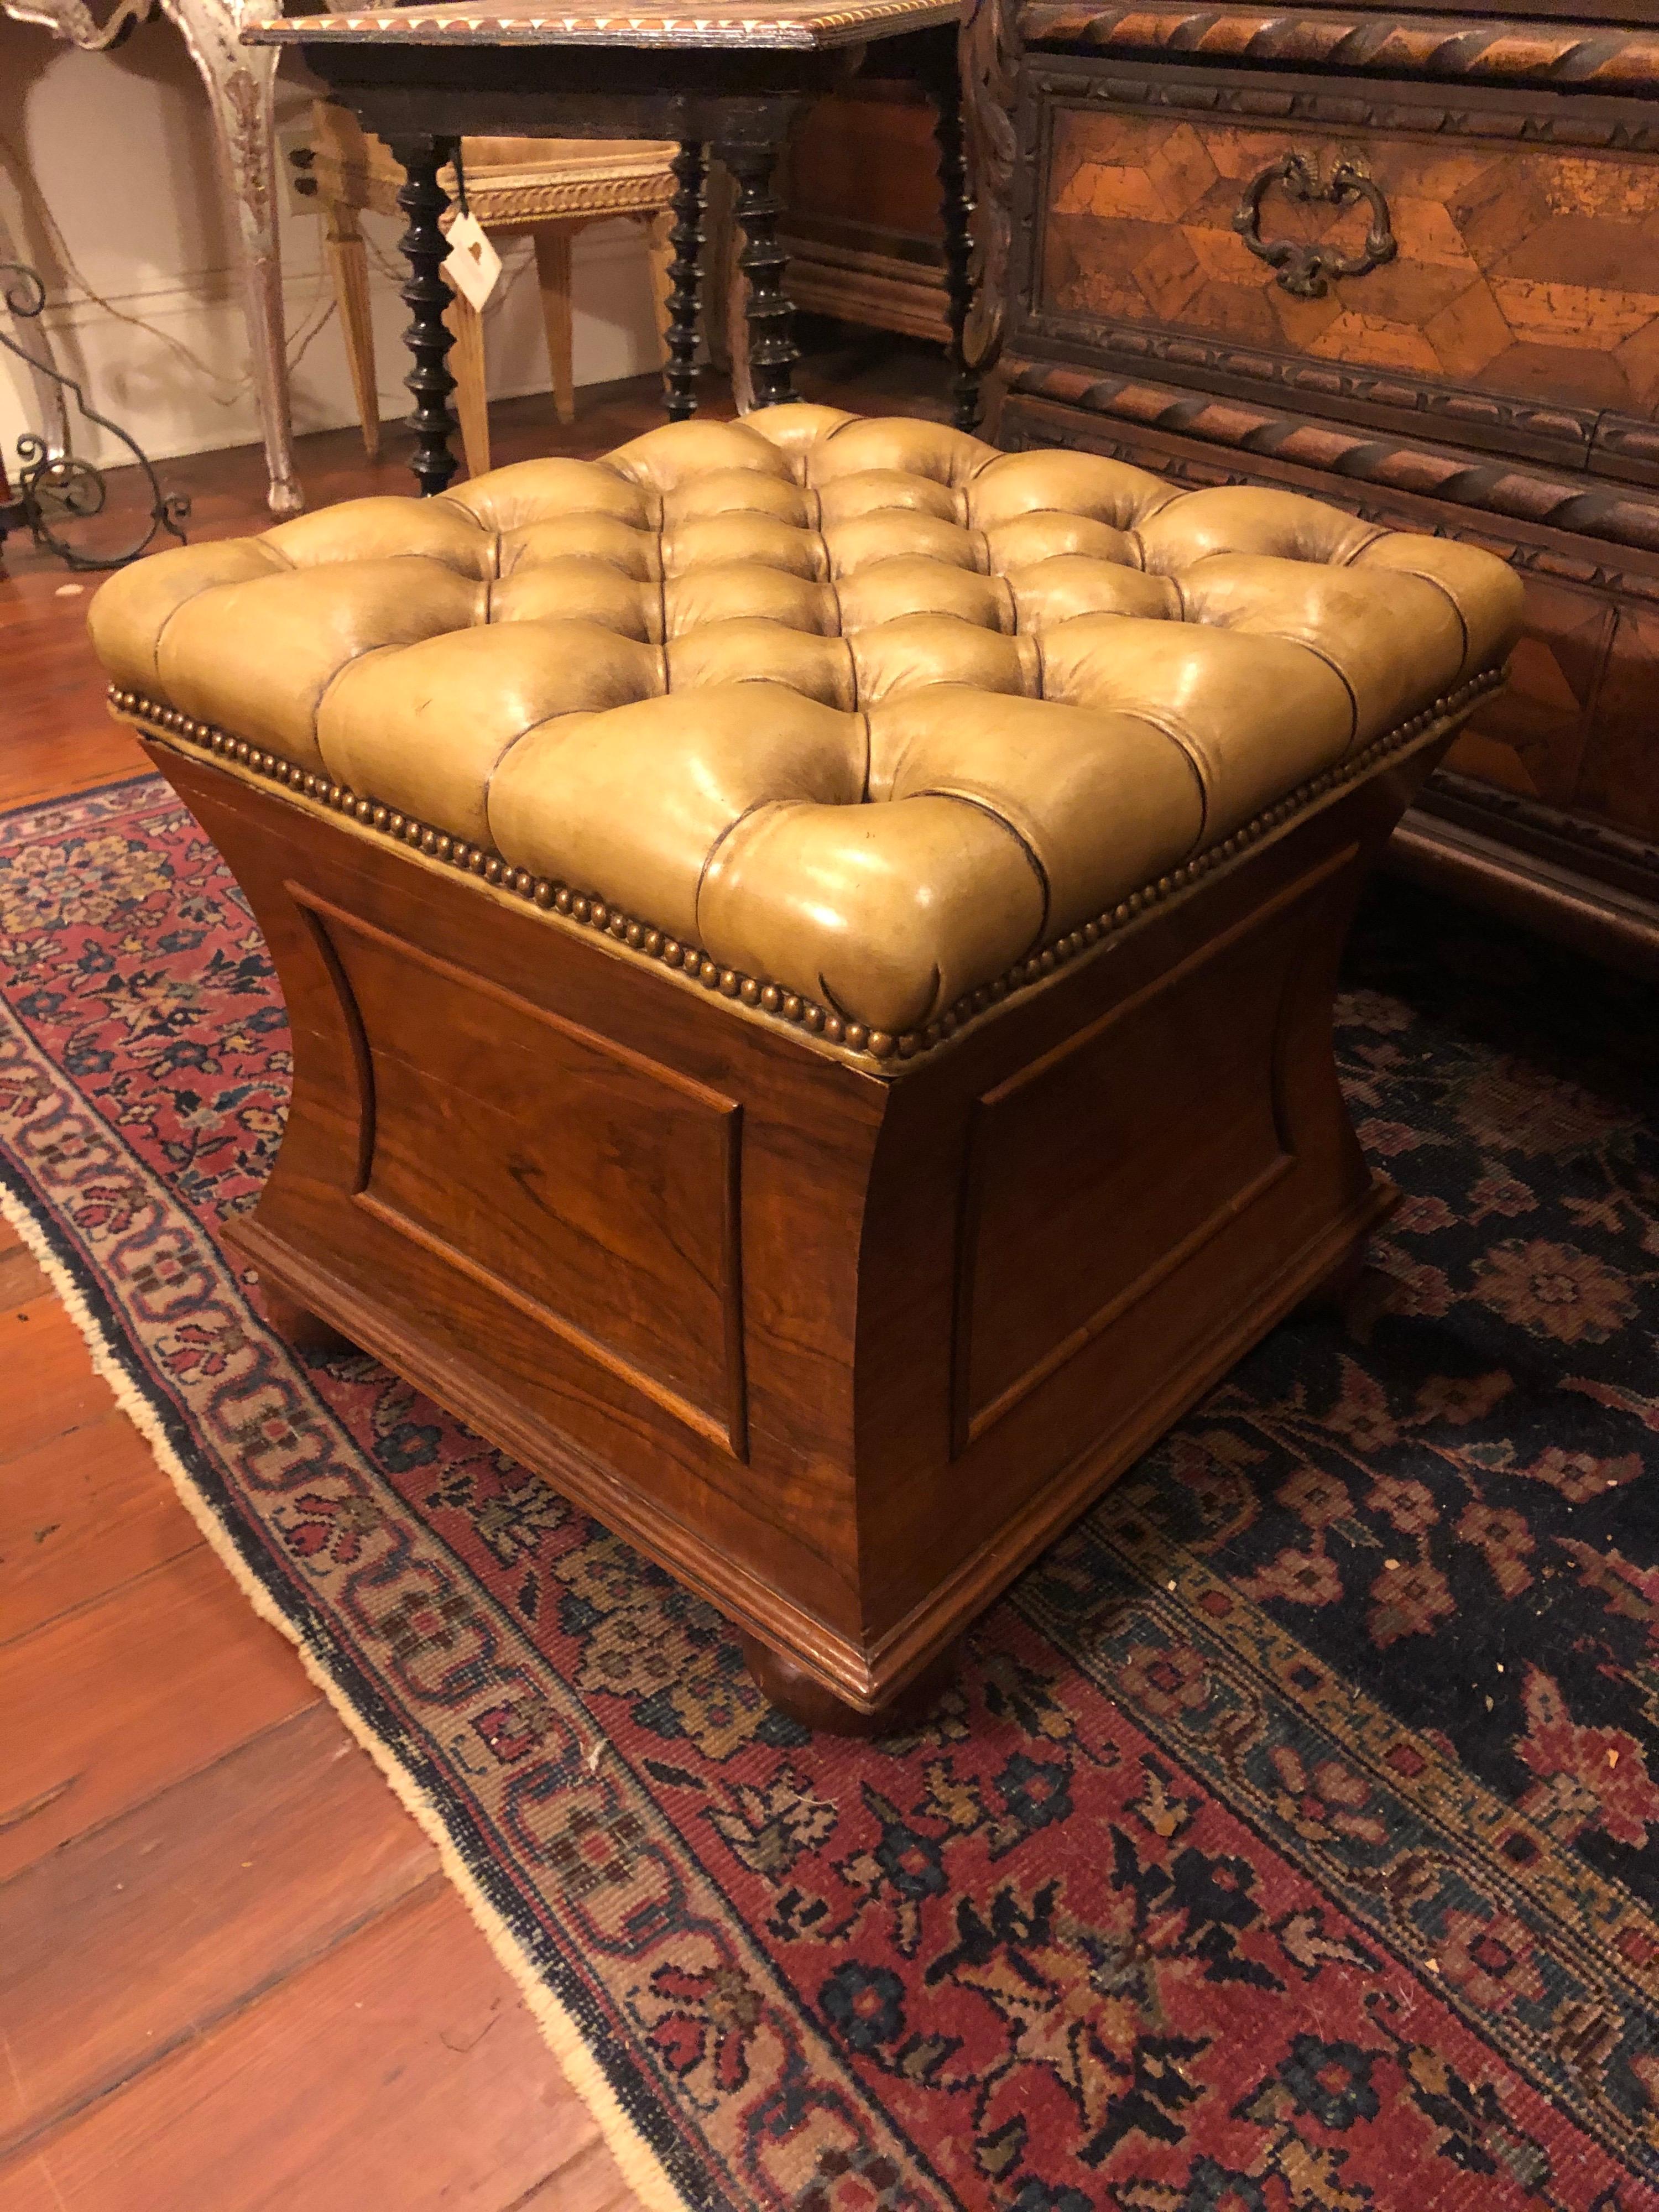 English regency stool with paneled concave sides and tufted leather top that opens for a storage box.